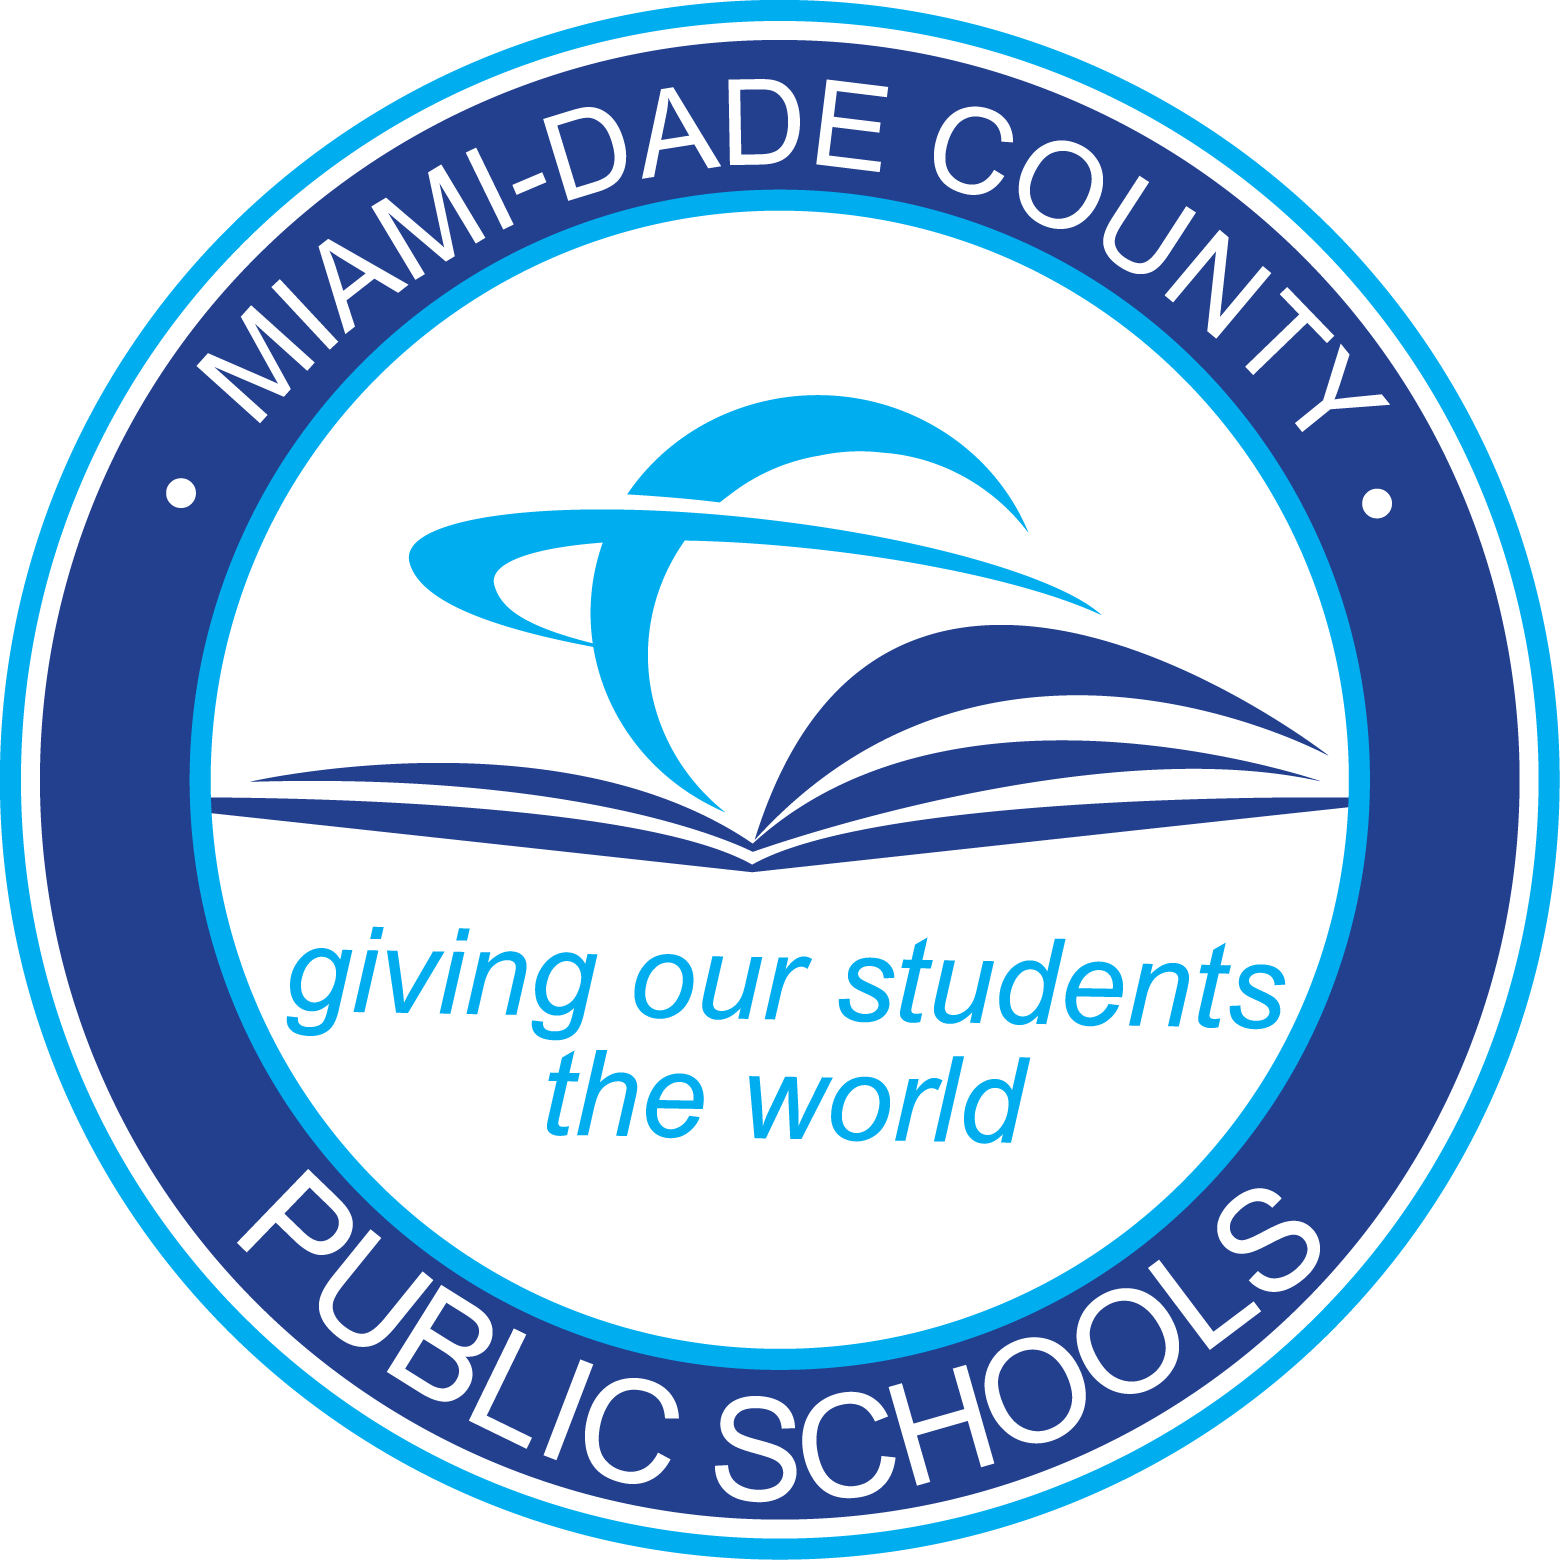 Miami-Dade Schools Investor Relations - Official Seal or Logo